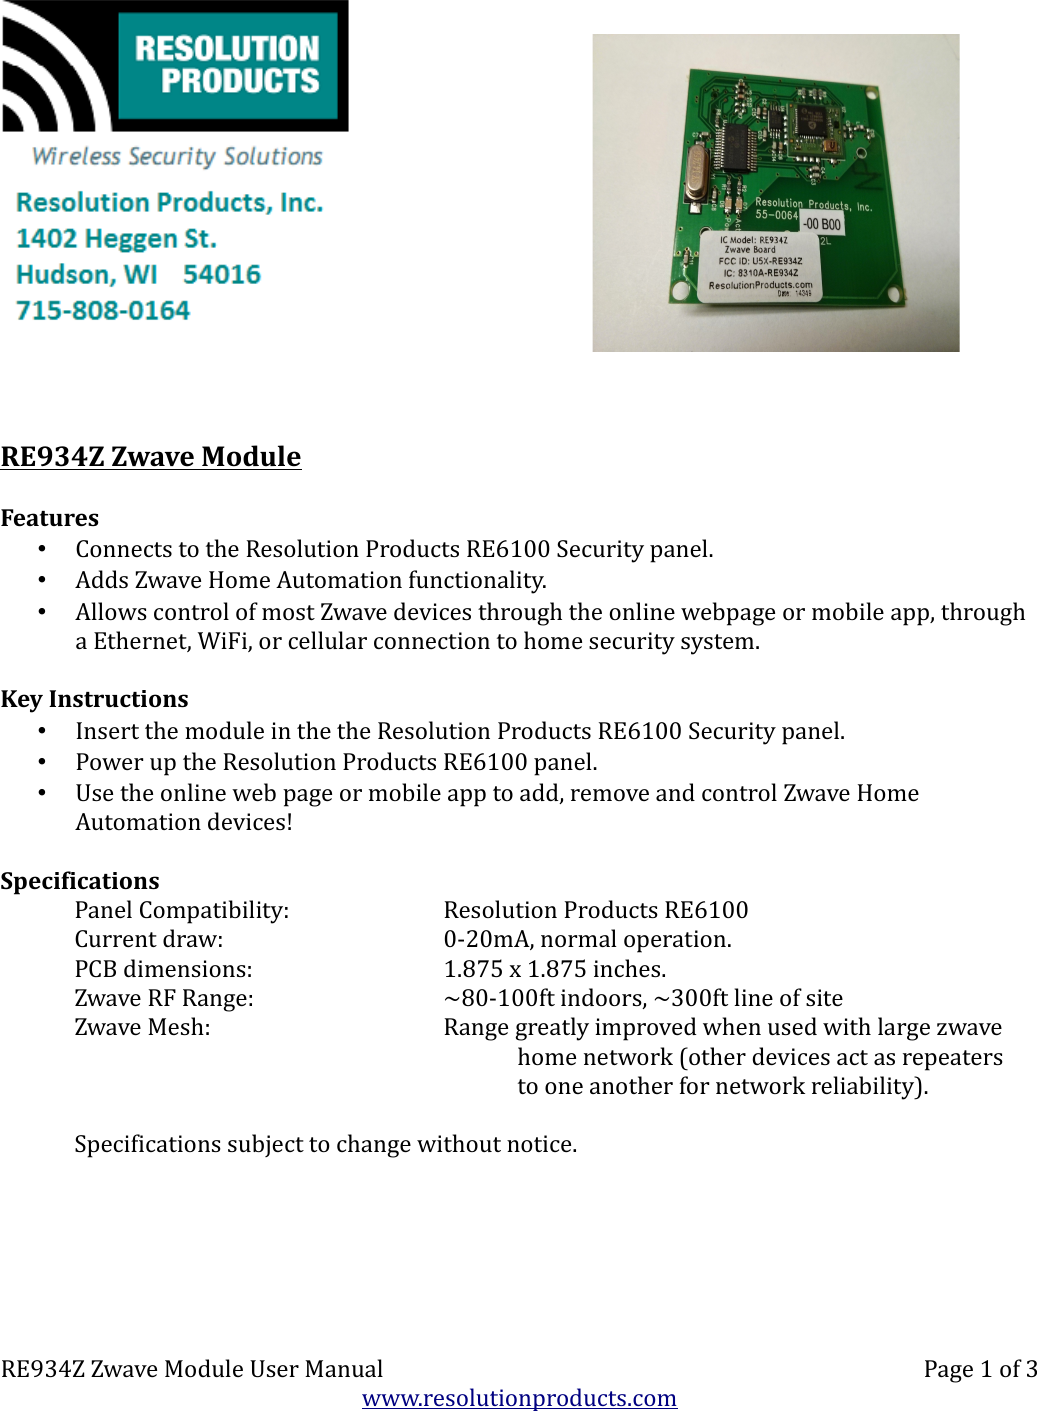 RE934Z Zwave ModuleFeatures•Connects to the Resolution Products RE6100 Security panel.•Adds Zwave Home Automation functionality.•Allows control of most Zwave devices through the online webpage or mobile app, through a Ethernet, WiFi, or cellular connection to home security system.Key Instructions•Insert the module in the the Resolution Products RE6100 Security panel.•Power up the Resolution Products RE6100 panel.•Use the online web page or mobile app to add, remove and control Zwave Home Automation devices!SpecificationsPanel Compatibility: Resolution Products RE6100Current draw: 0-20mA, normal operation.PCB dimensions: 1.875 x 1.875 inches.Zwave RF Range: ~80-100ft indoors, ~300ft line of siteZwave Mesh: Range greatly improved when used with large zwavehome network (other devices act as repeatersto one another for network reliability).Specifications subject to change without notice.RE934Z Zwave Module User Manual Page 1 of 3www.resolutionproducts.com